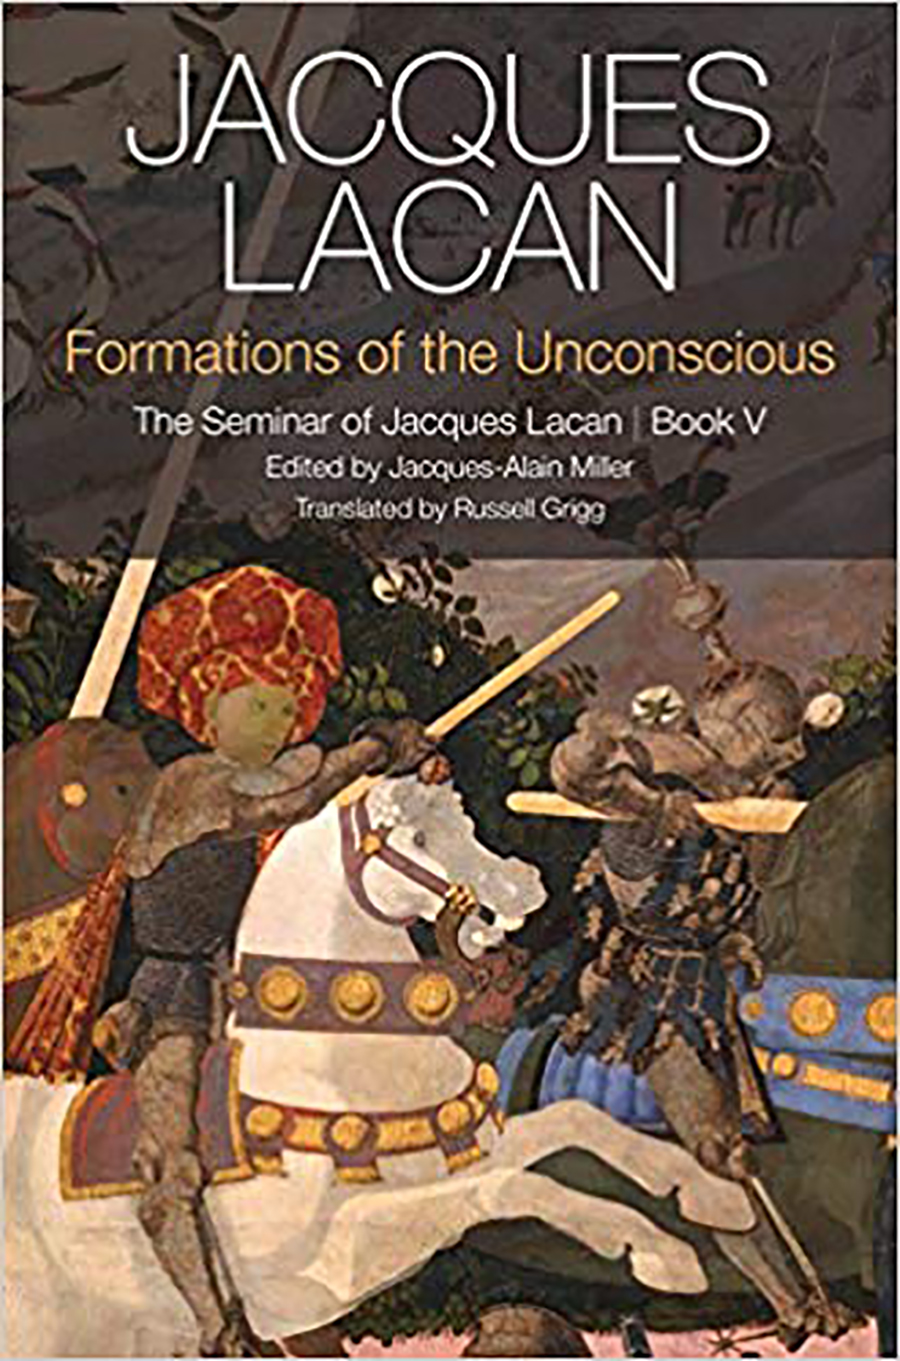 Jacques-lacan-the-seminar-of-jacques-lacan-book-v-1957-1958-formations-of-the-unconscious-theoryleaks.jpg